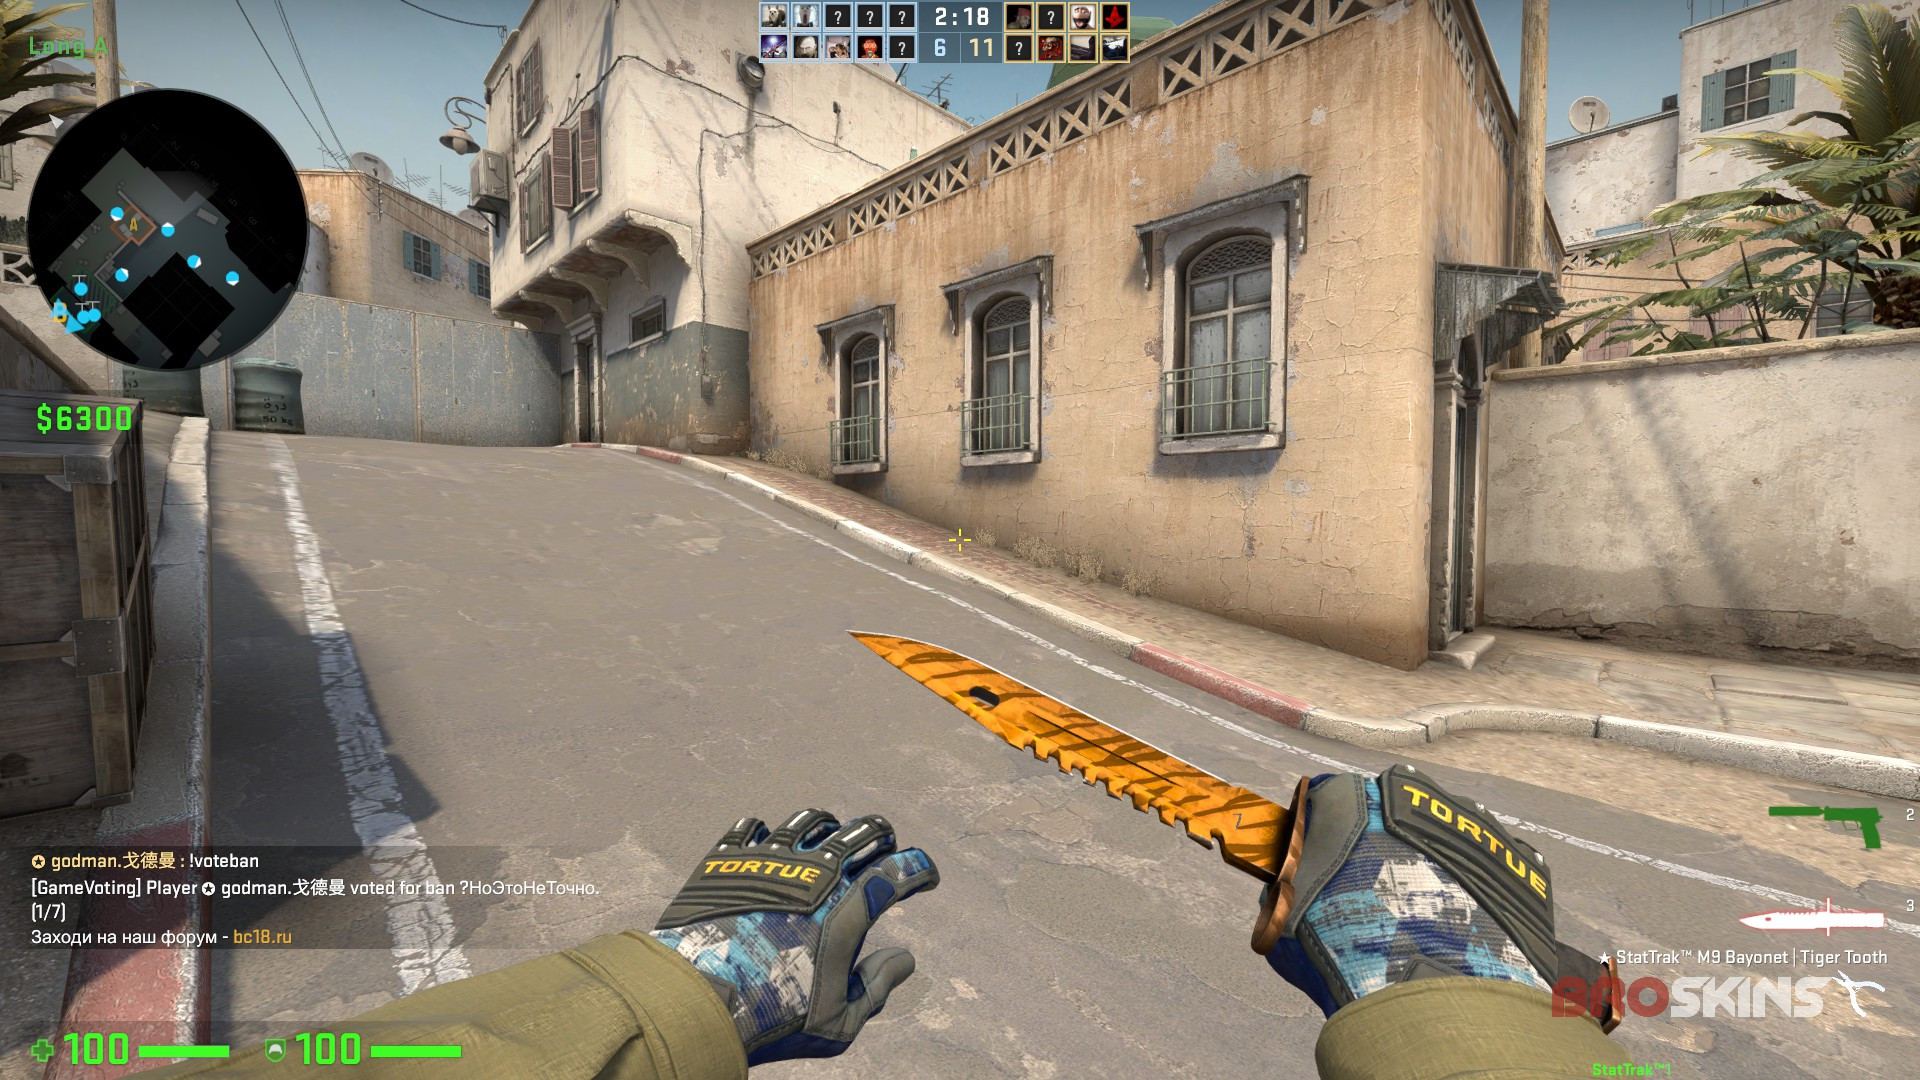 M9 Tiger Tooth + Specialist Gloves Mogul